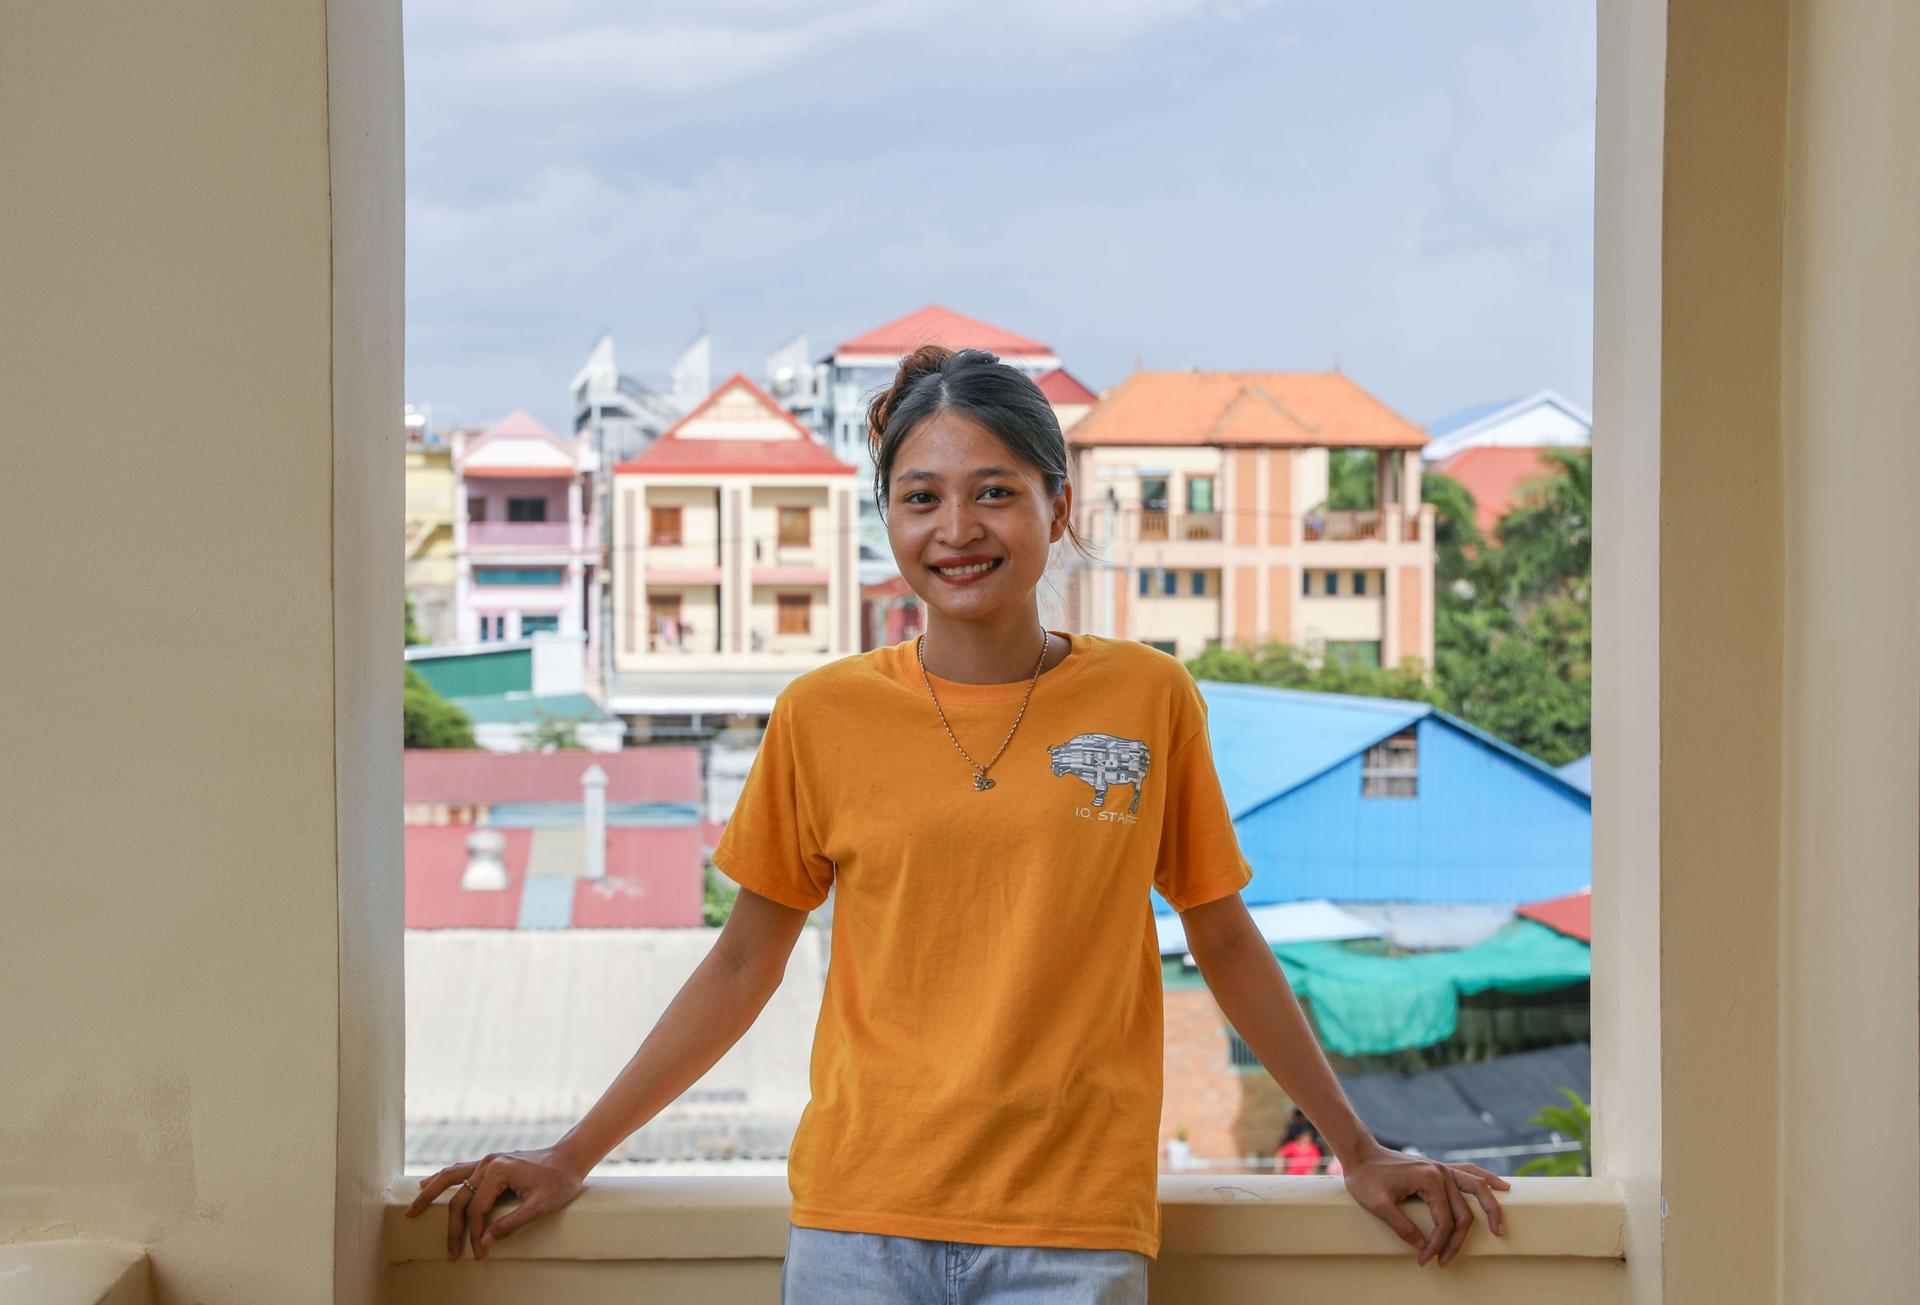 Portrait of a woman in a yellow shirt posing on a balcony. There is a cityscape behind her.